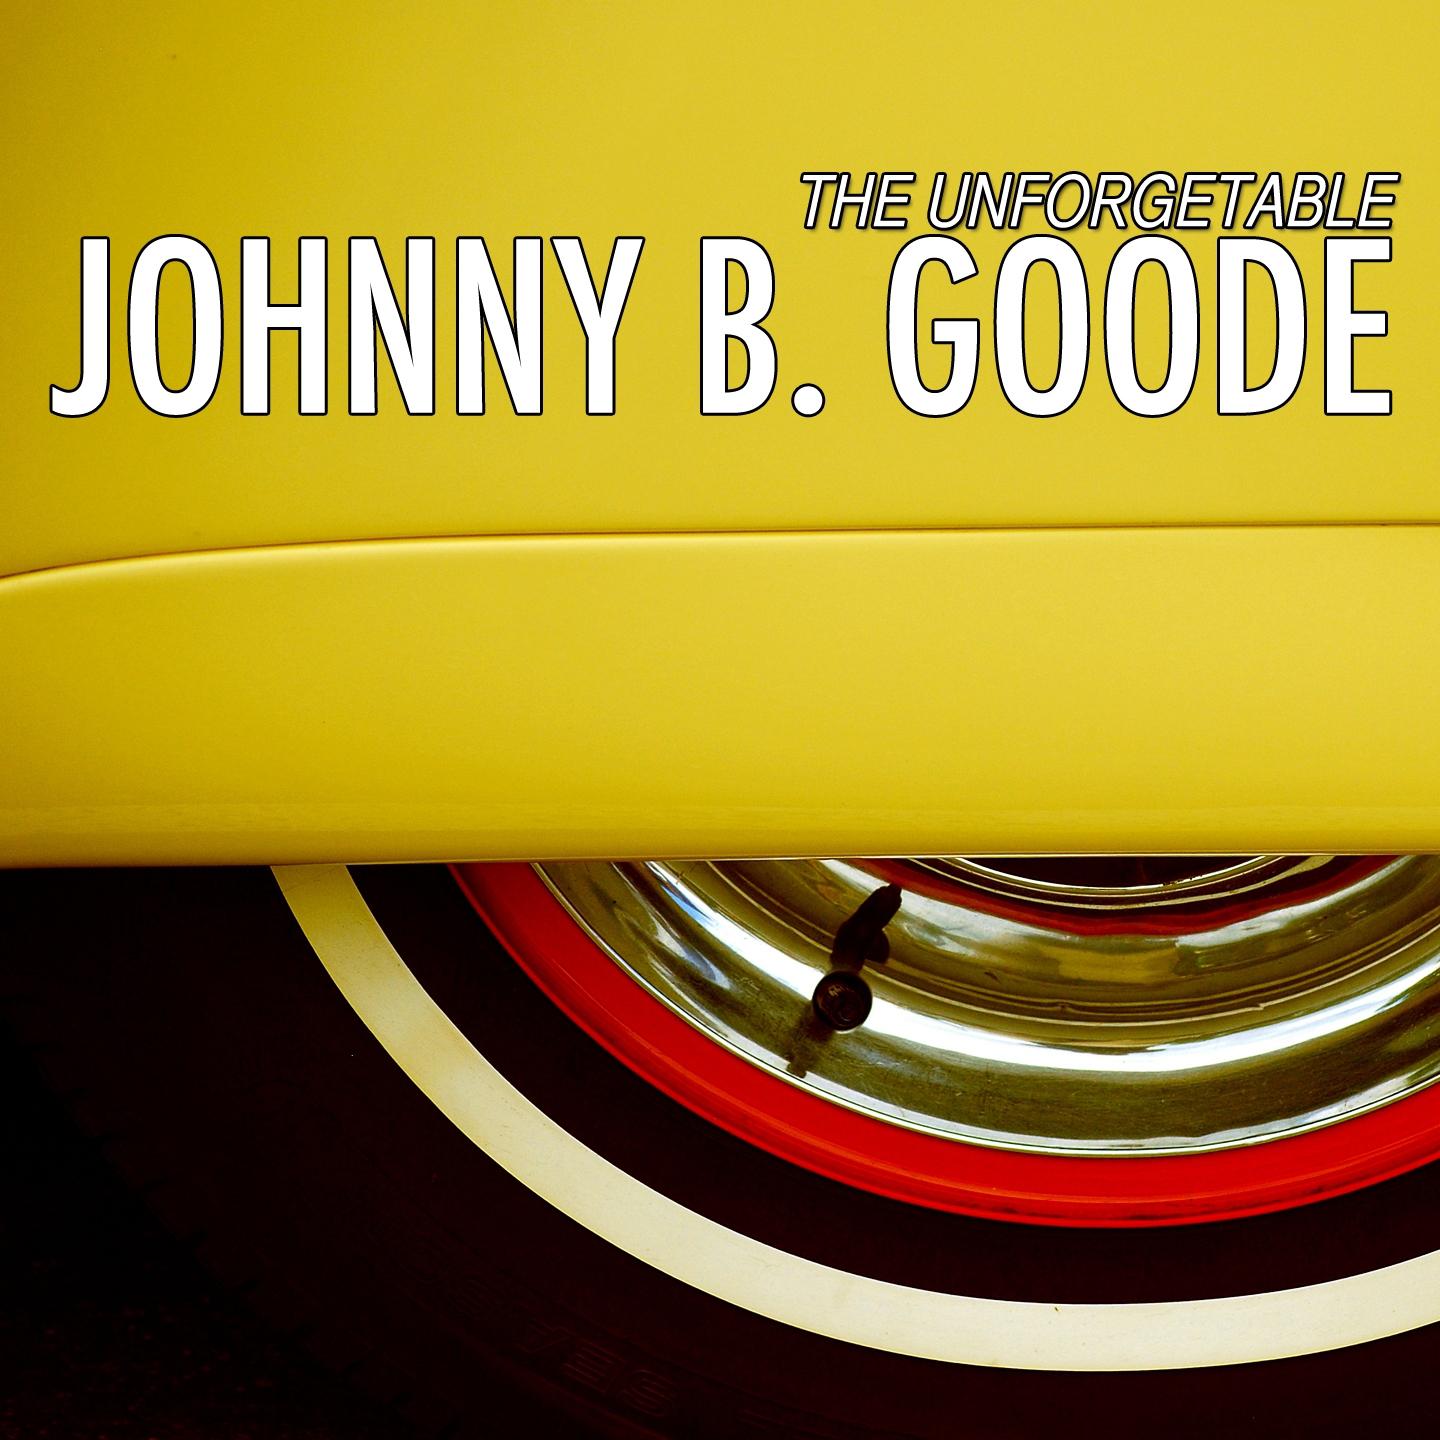 The Unforgetable Johnny B. Goode (Johnny B. Goode)